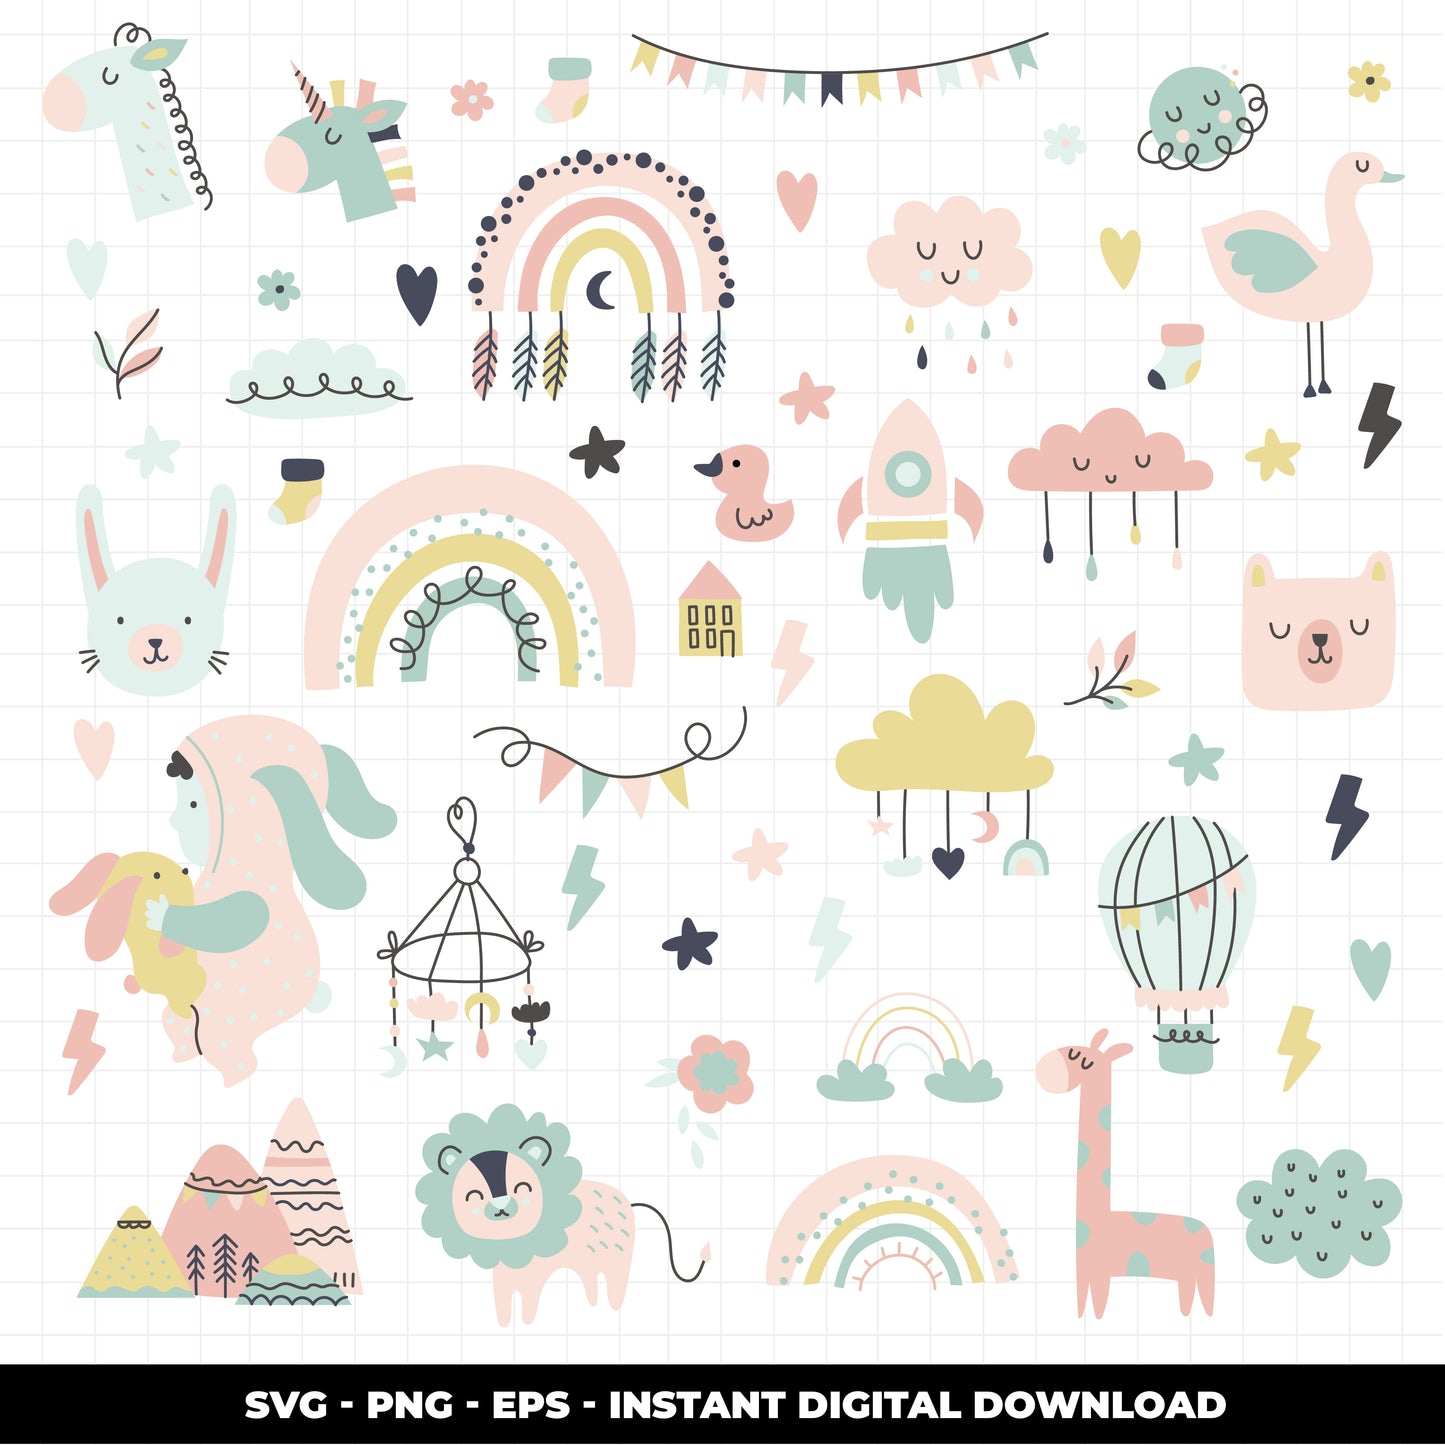 COD1141 Baby svg, baby doodle svg, baby png, baby clipart, unicorn baby svg